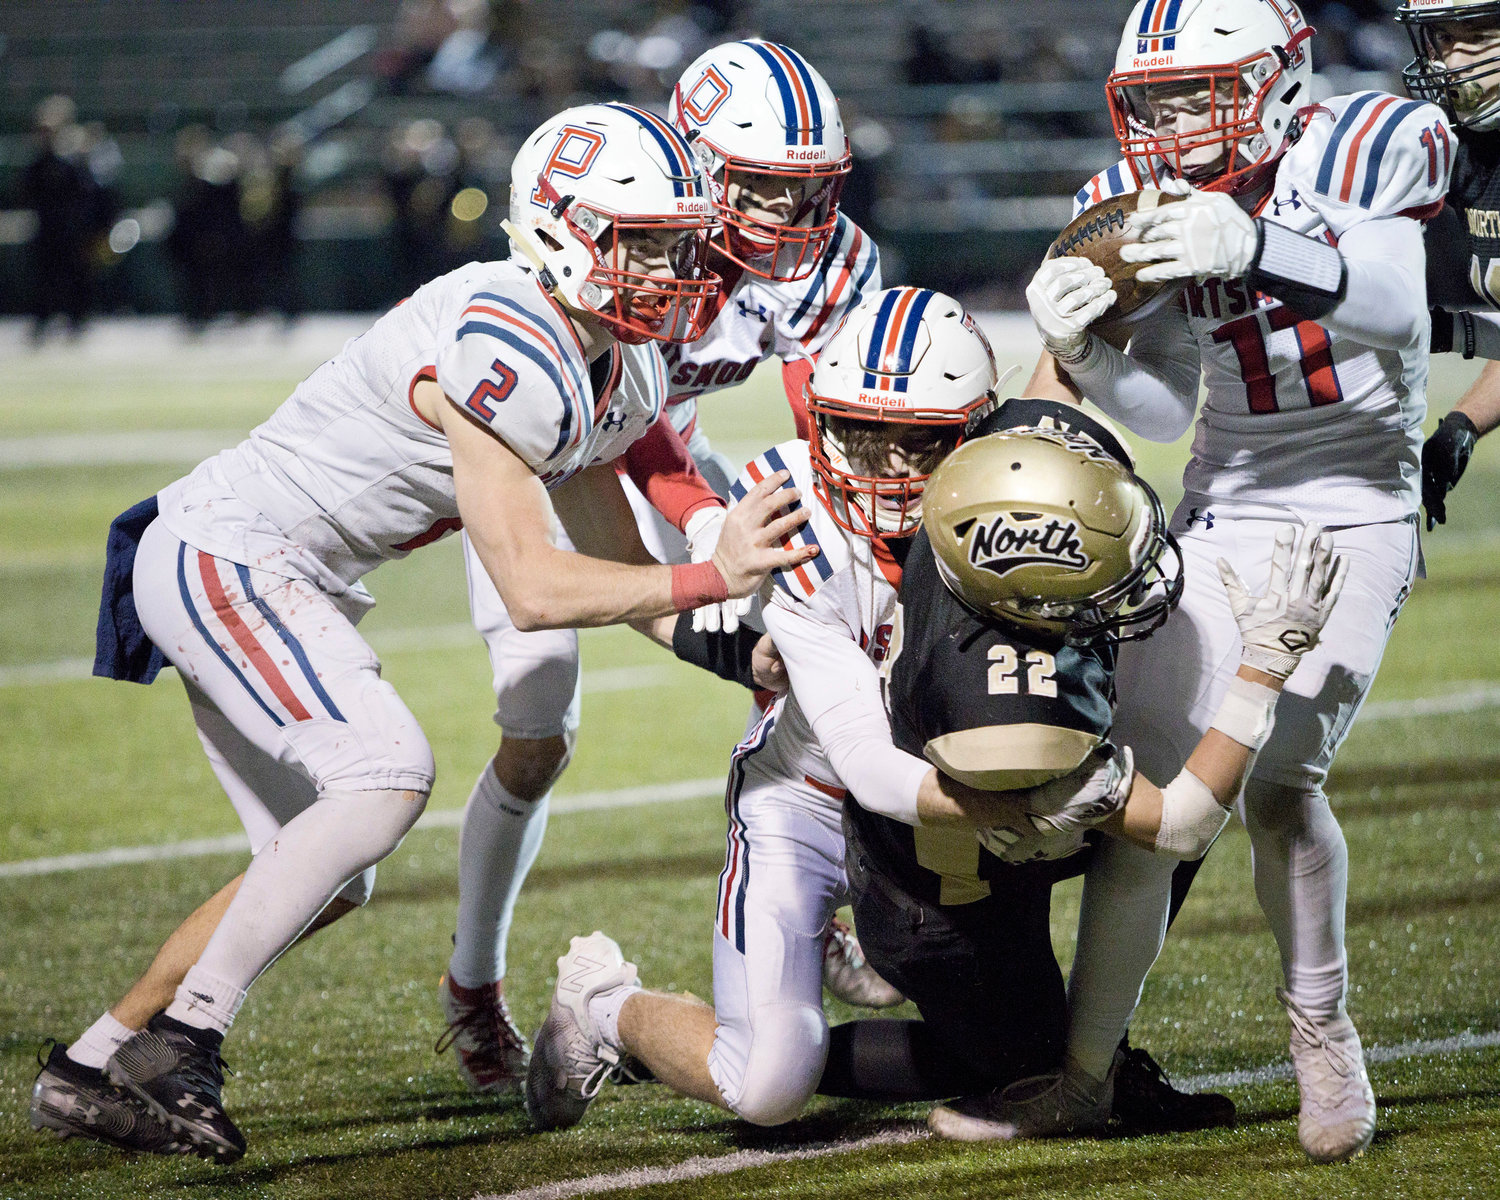 Gavin Bicho (right) attempts to pry the ball from a North Kingstown ball-carrier as his teammates make the tackle.